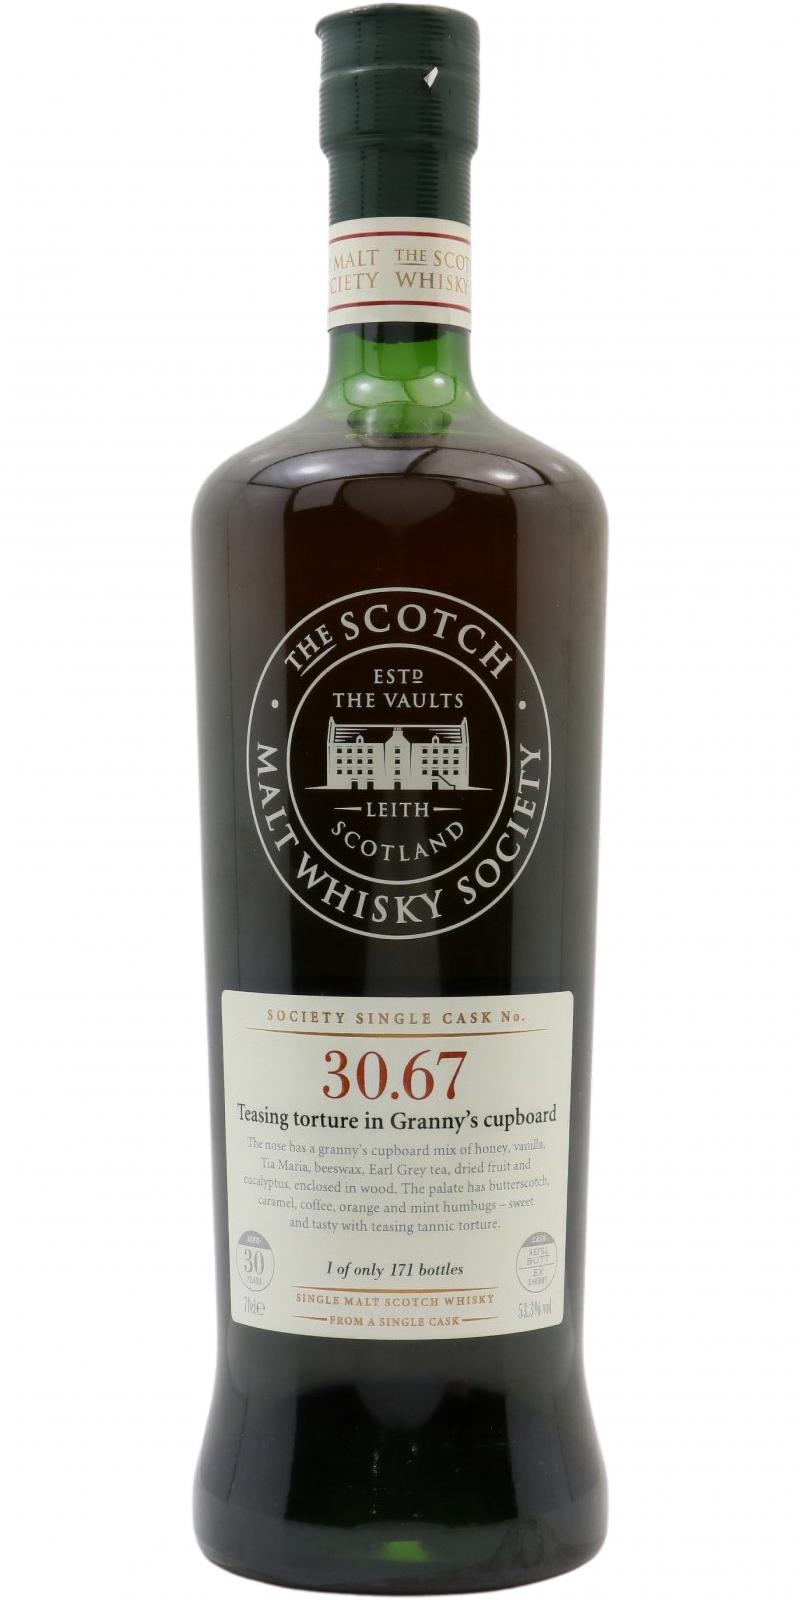 Glenrothes 1980 SMWS 30.67 Teasing torture in Granny's cupboard Refill Ex-Sherry Butt 30.67 53.3% 700ml